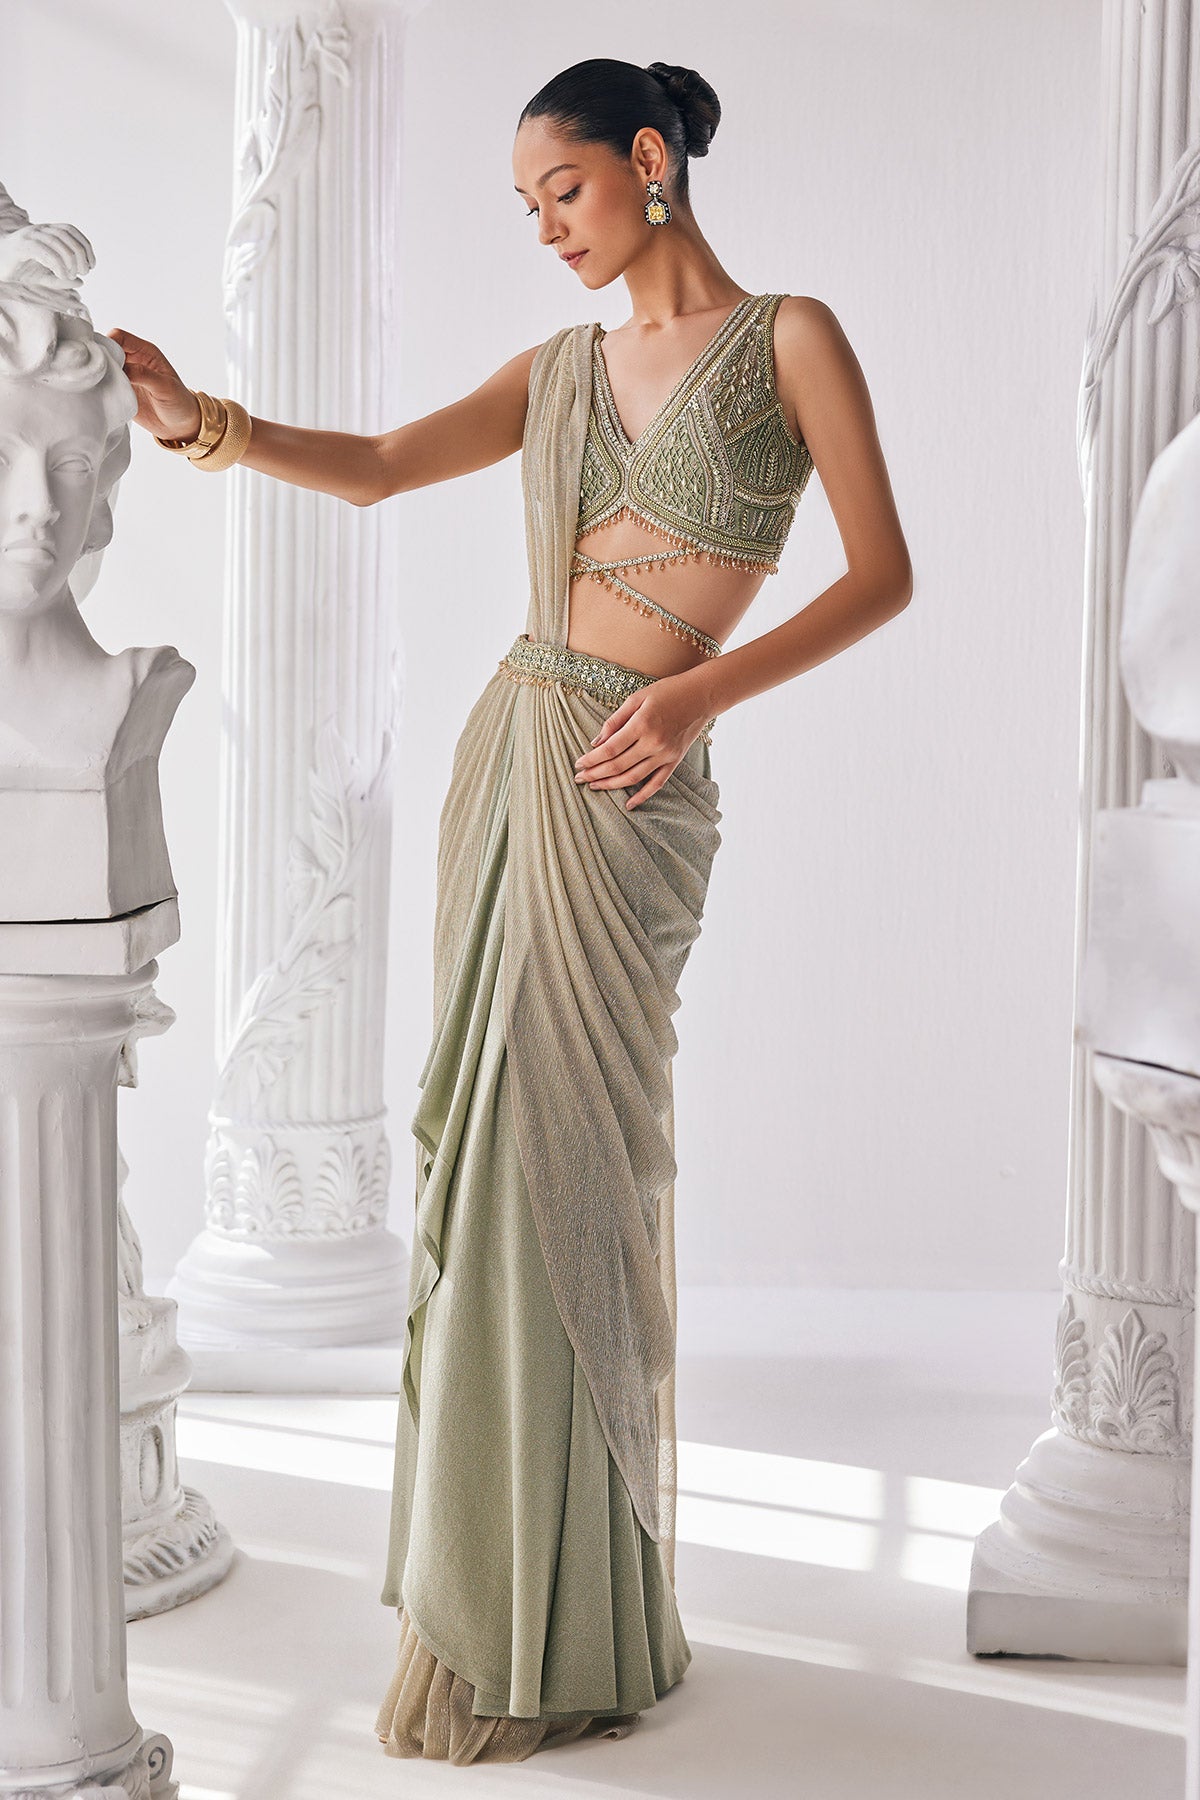 Jade Green Coloured Draped Saree In Lycra And Crinkle Fabric. It Features A Plunging Neck Blouse With Beadwork And Sequin Detailing.